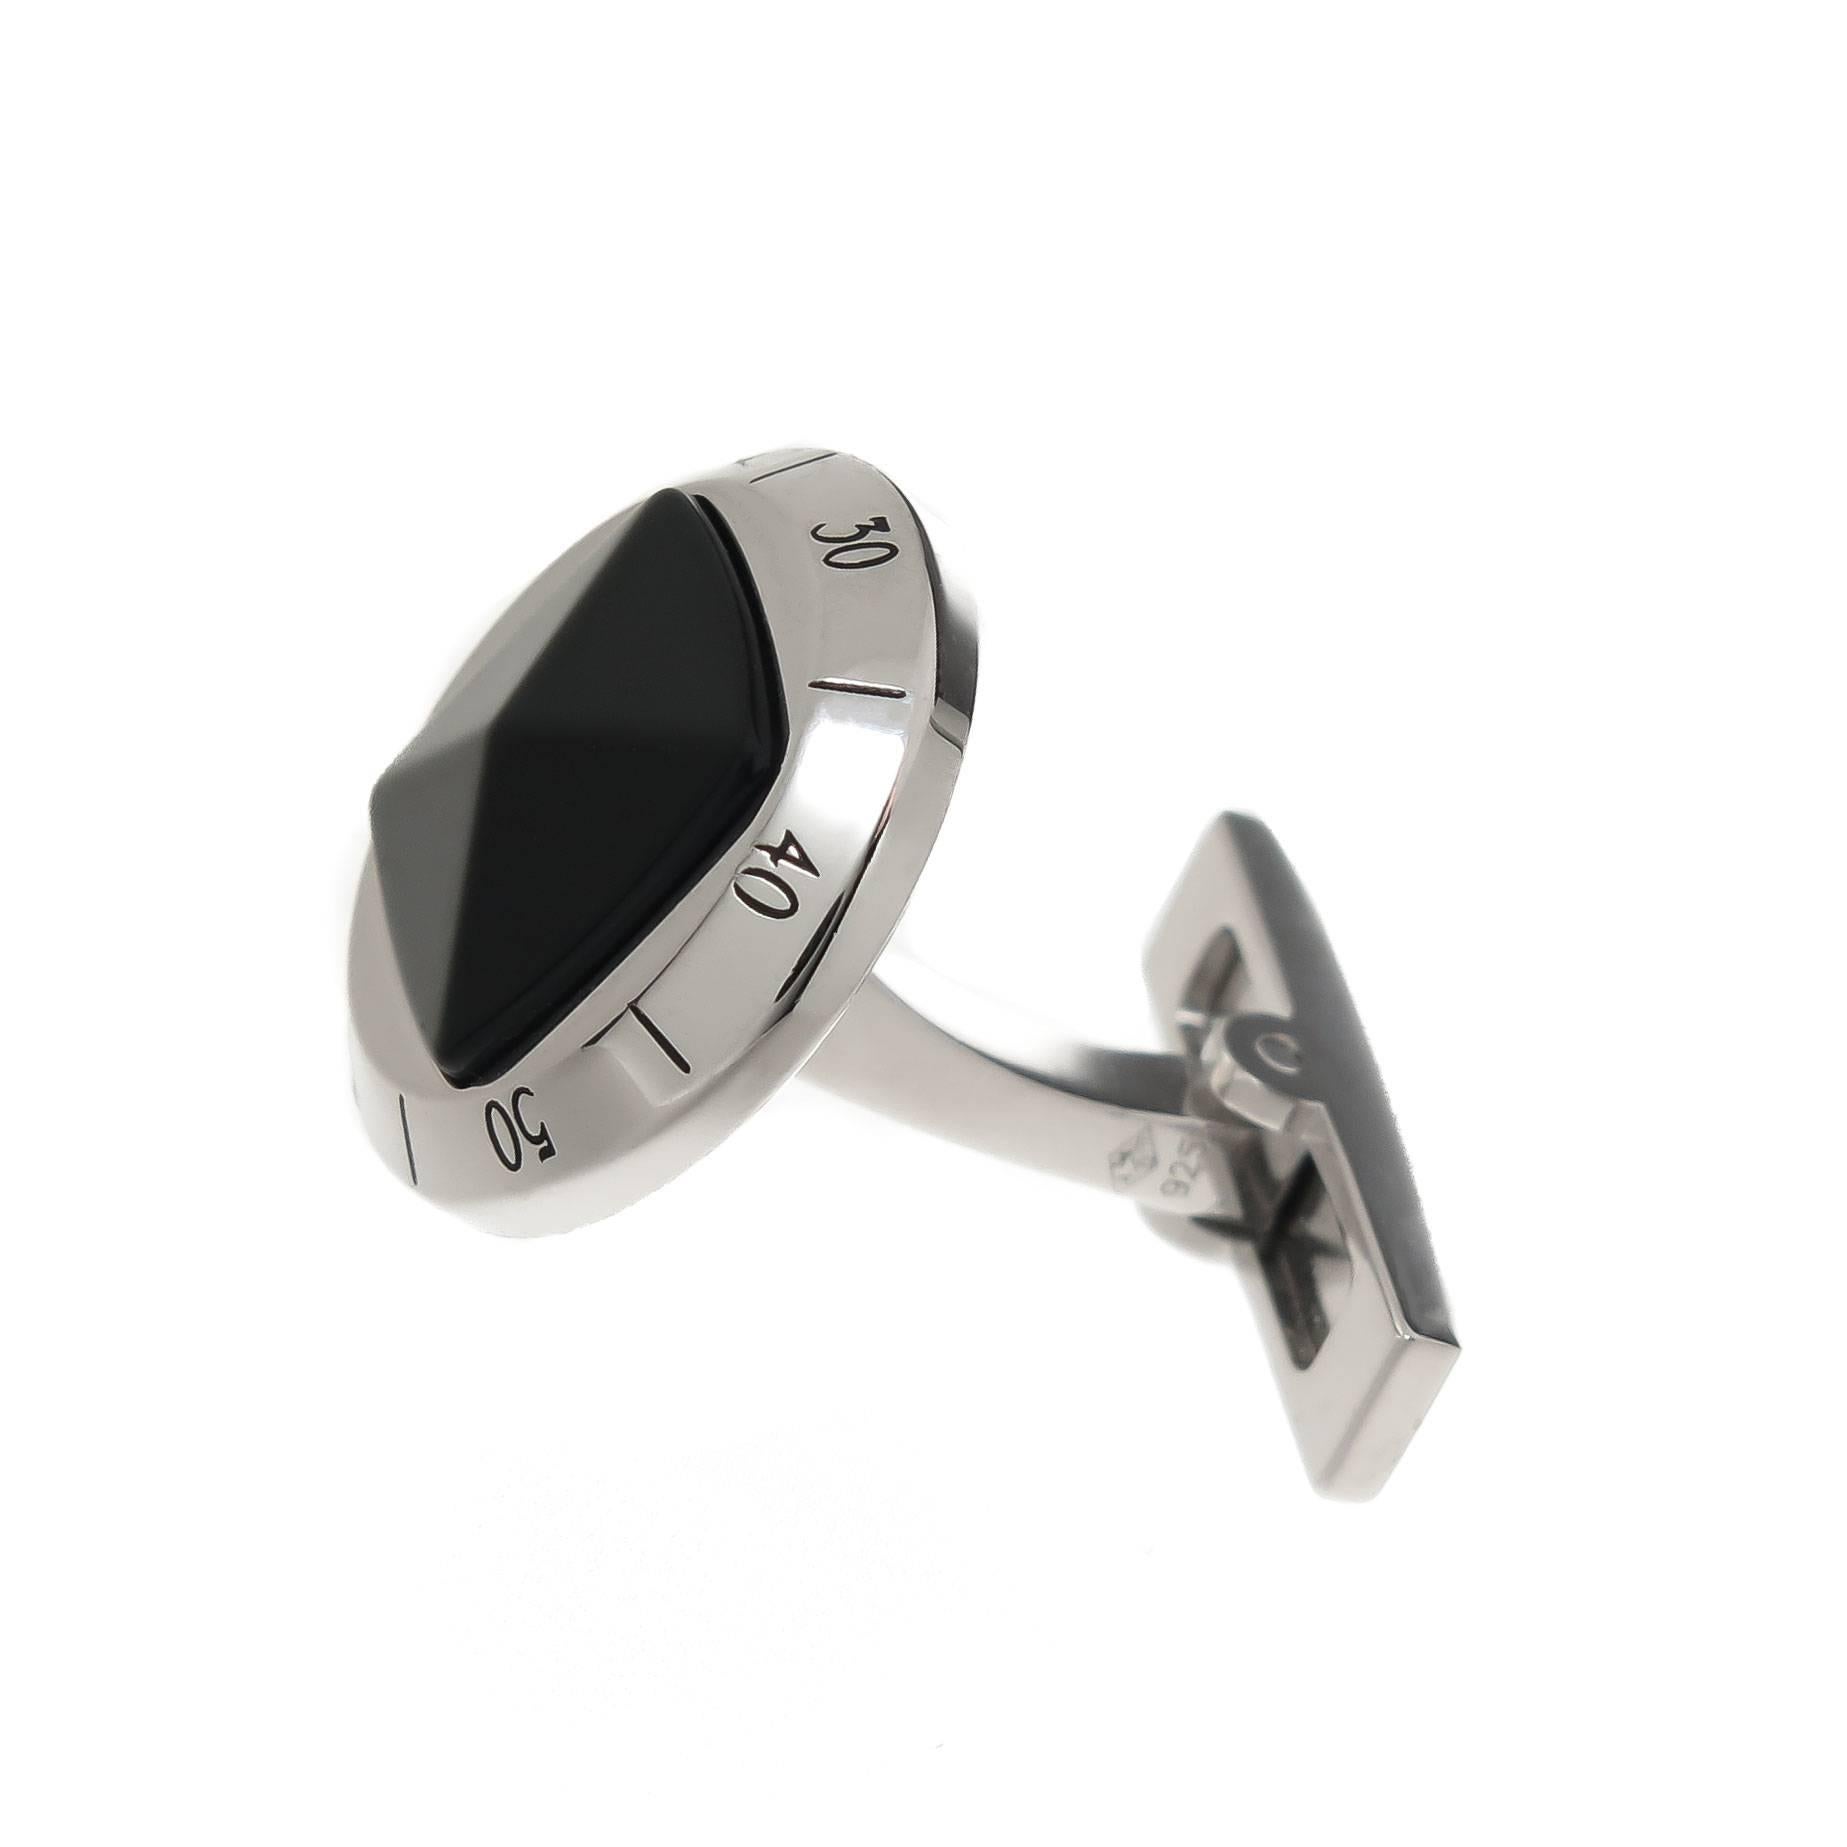 Circa 2010 Cartier Pasha De Cartier Sterling Silver and Onyx Cuff-links. Measuring 5/8 inch in diameter and having a 4 sided pyramid cut Black Onyx. Signed and numbered and in the original Cartier presentation box.